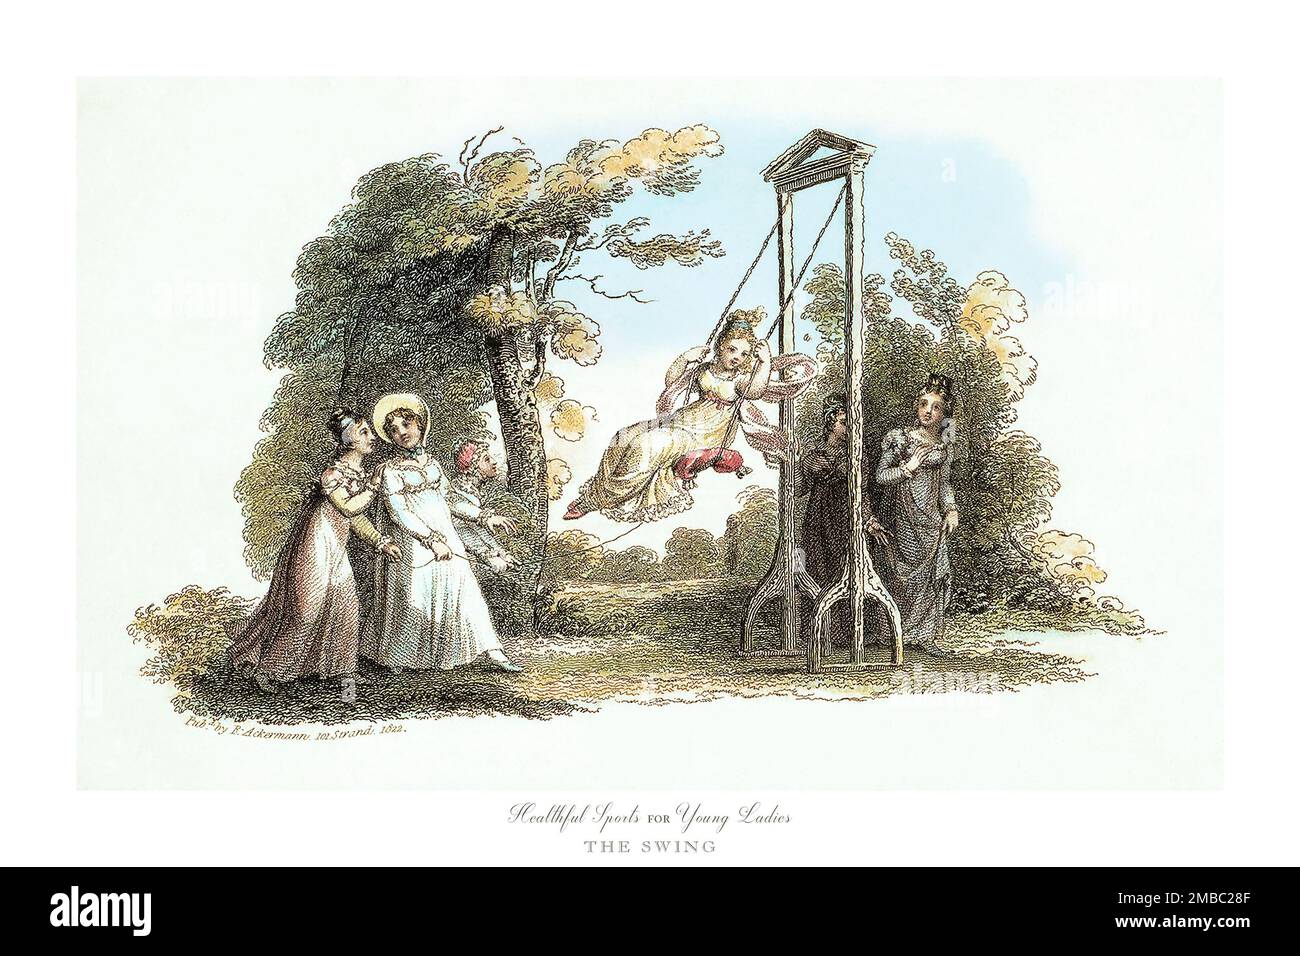 The Swing, Healthful Sports for Young Ladies, Antique gravé Illustration Banque D'Images